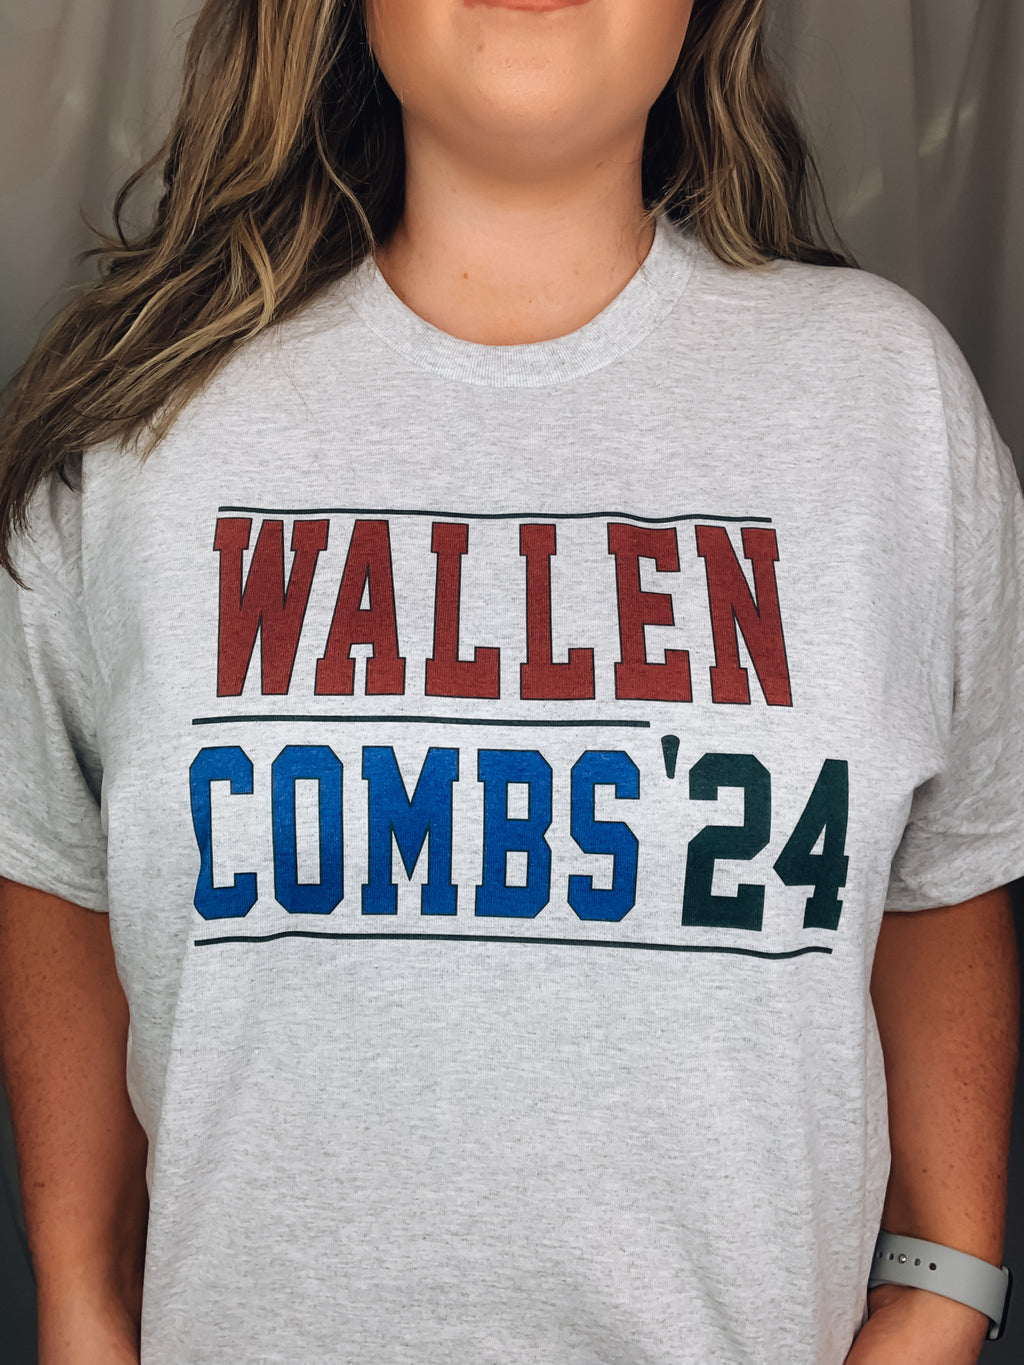 Graphic tee features a heathered gray base color with a red/ blue coloring. This tee is unisex fit, has a round neckline, and runs true to size!